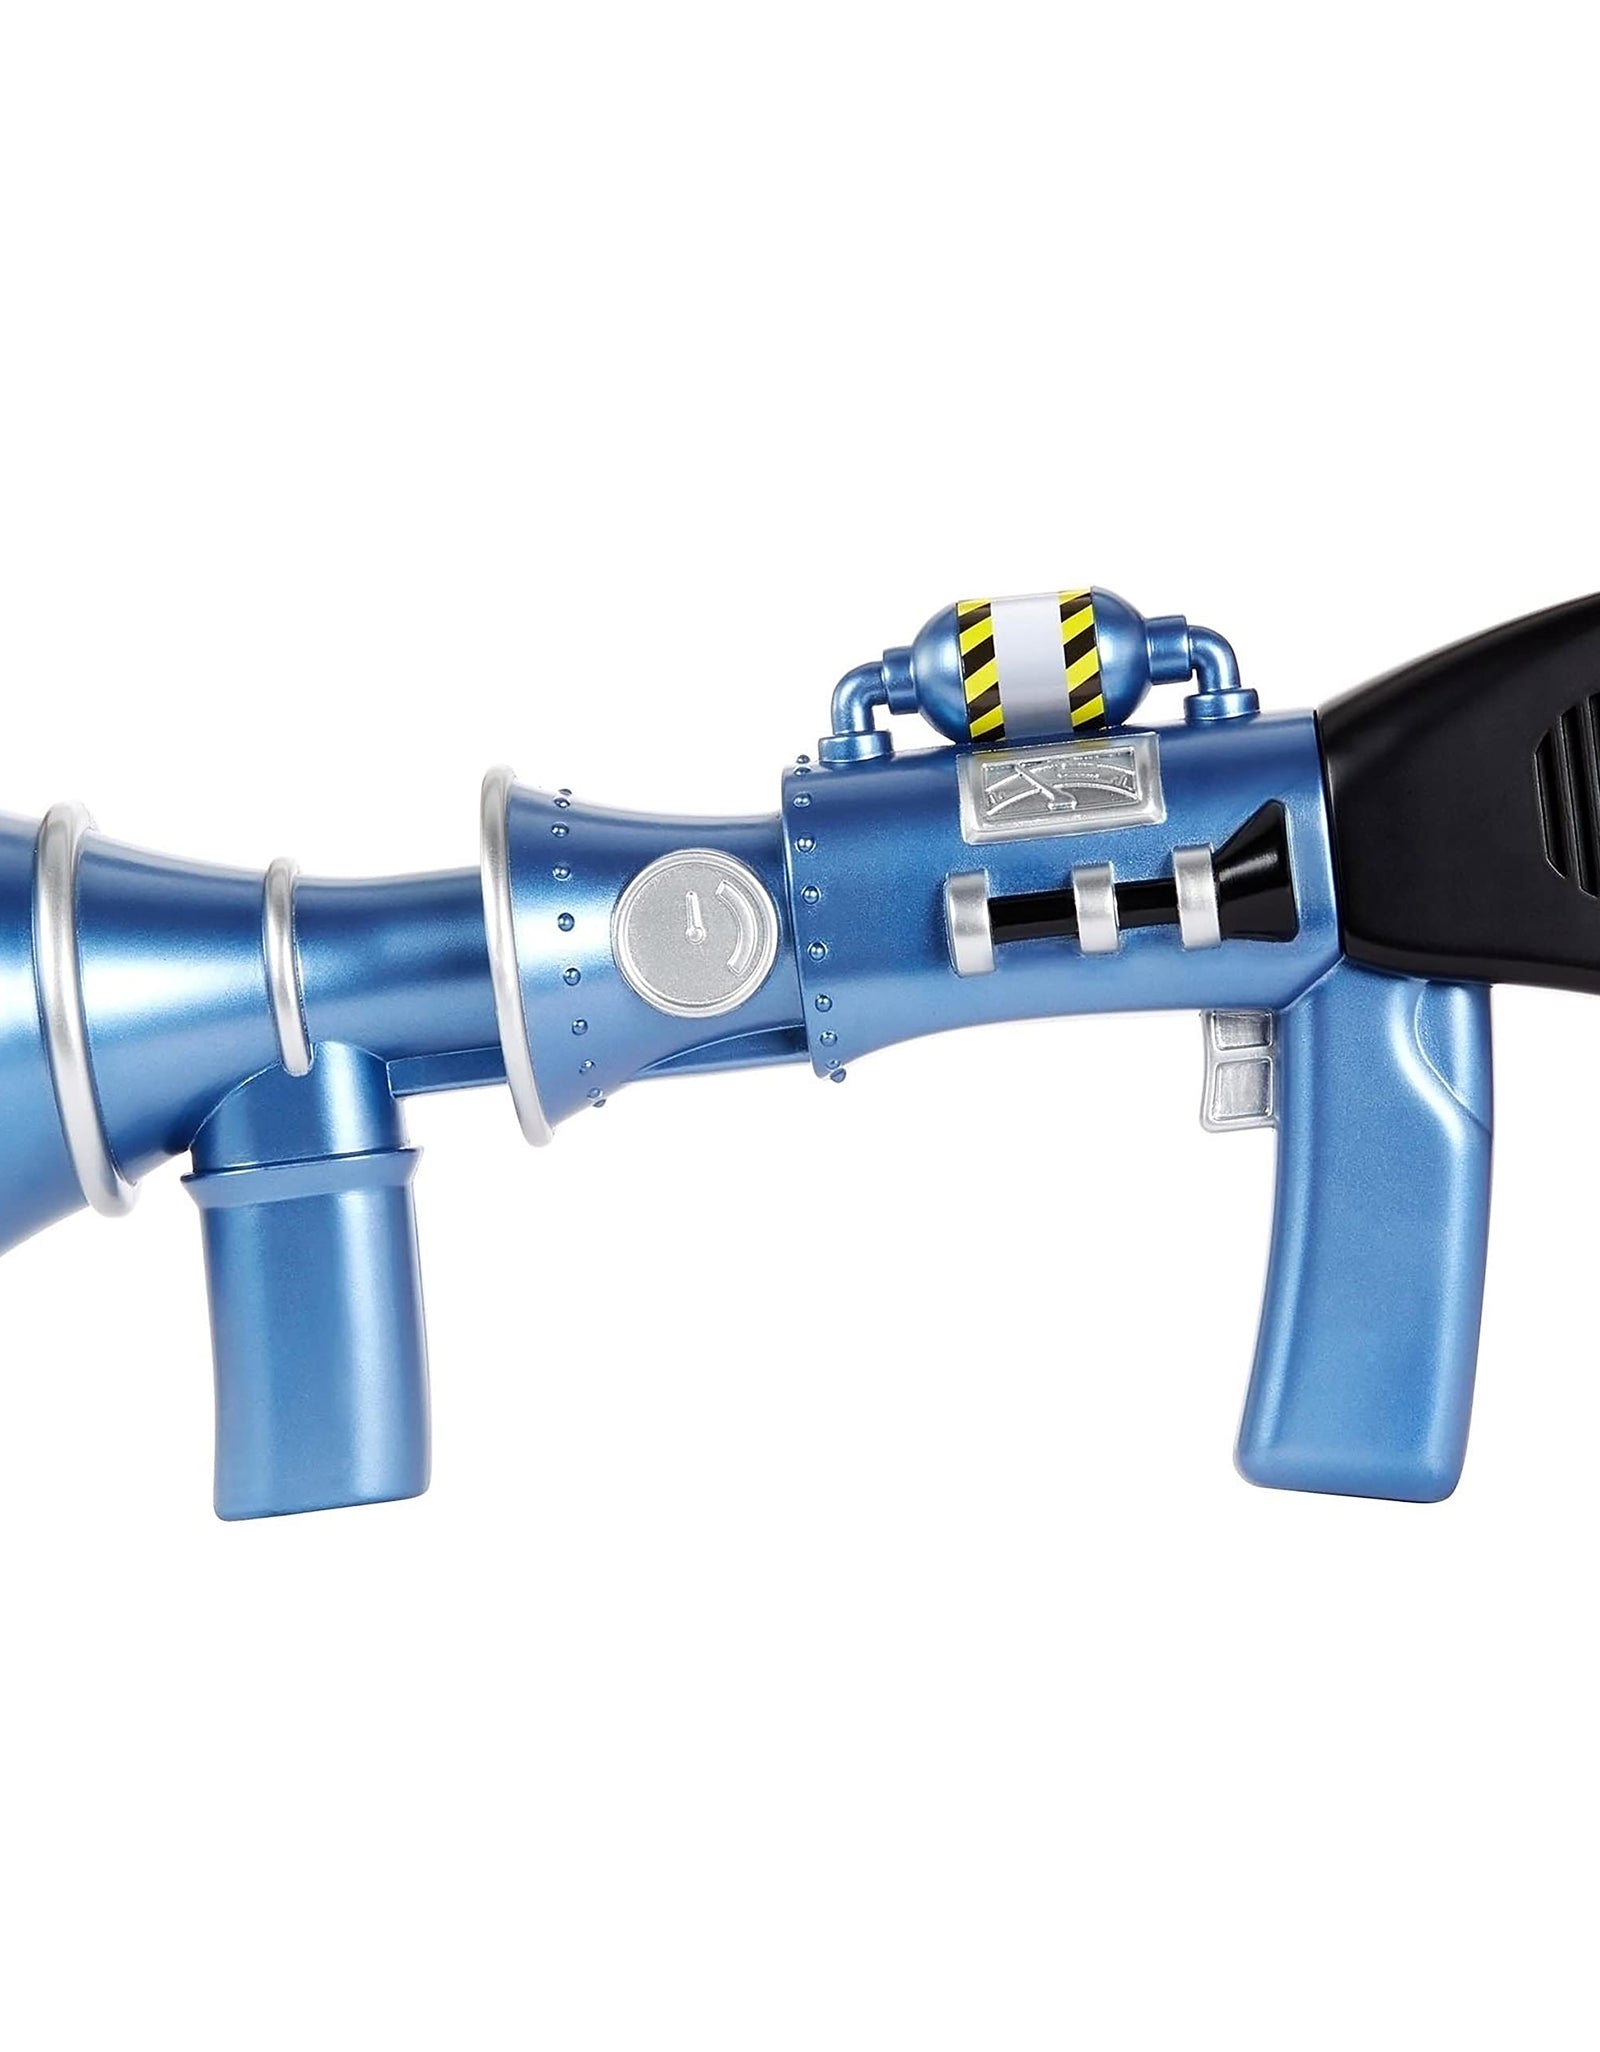 Minions: Fart 'n Fire Super-Size Blaster with 20 Plus Fart Sounds and Realistic Far Mist, Makes a Great Gift for Kids Ages 4 Years and Older